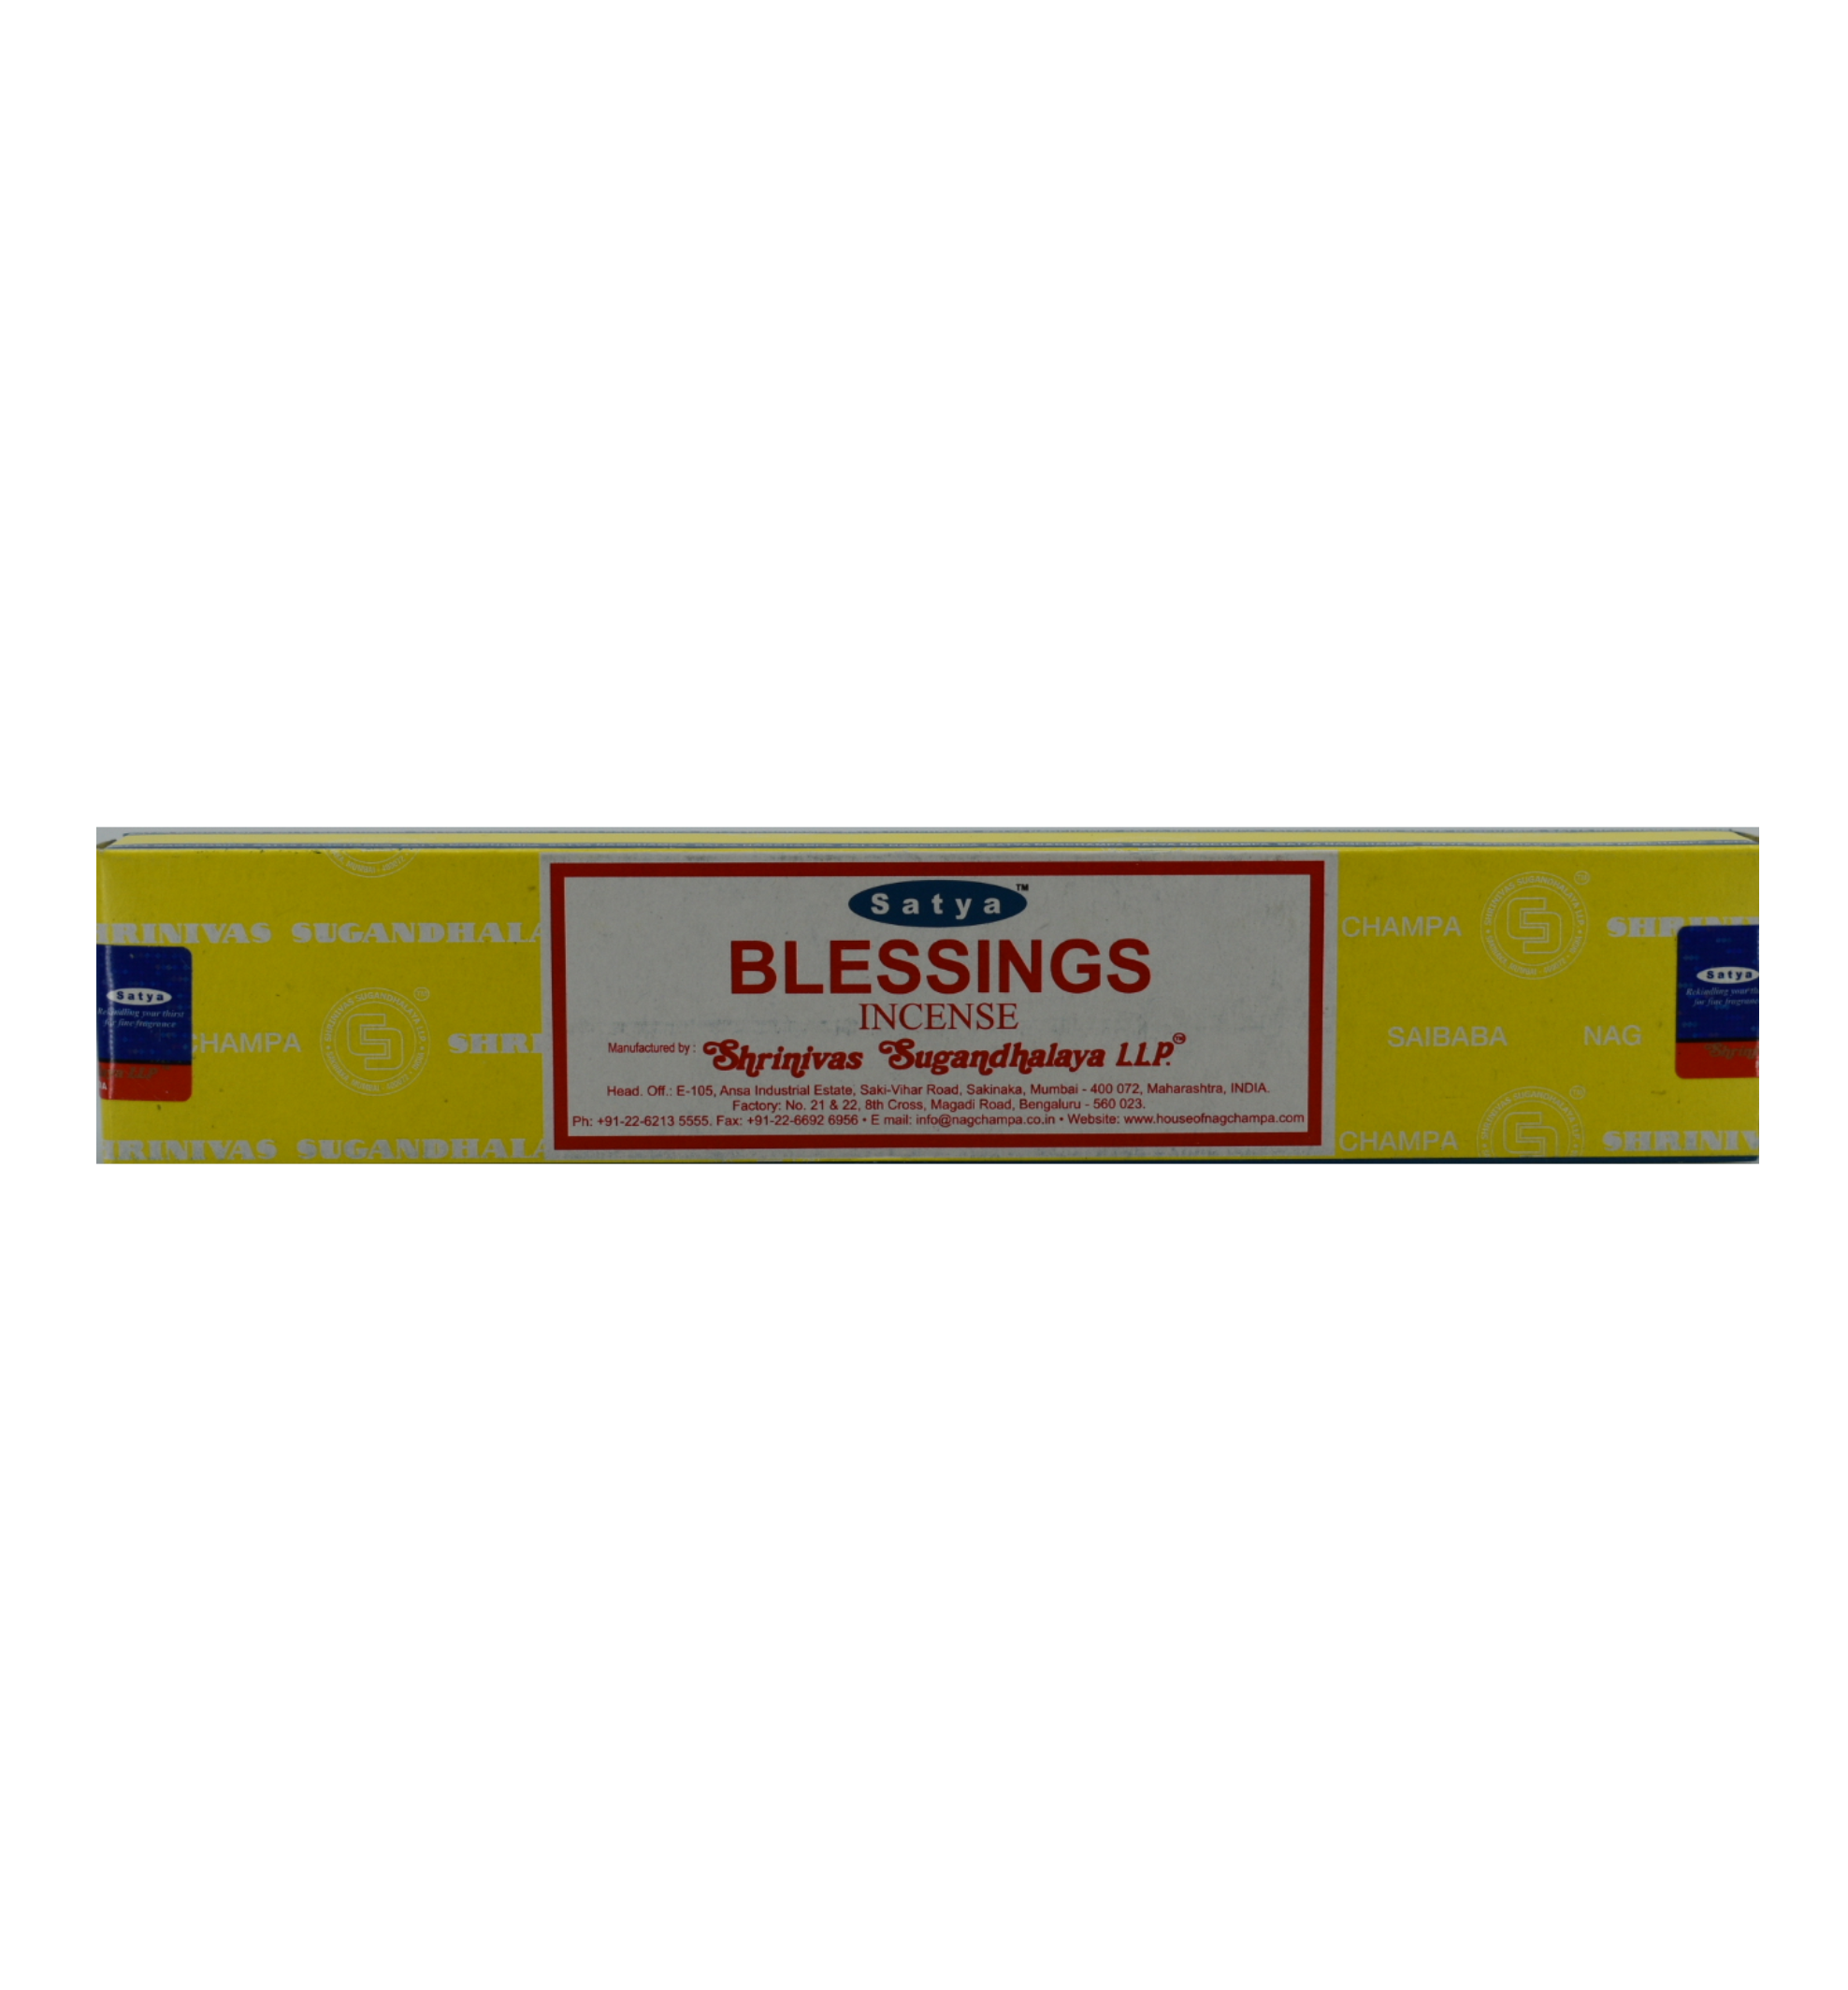 Blessings Incense Sticks. The box is yellow with a rectangle in the center. The rectangle is white with a red frame inside the white border. In a blue oval at the top of the rectangle is the company name Satya. Below it is the title Blessings Incense. Below that is the manufacturers information.